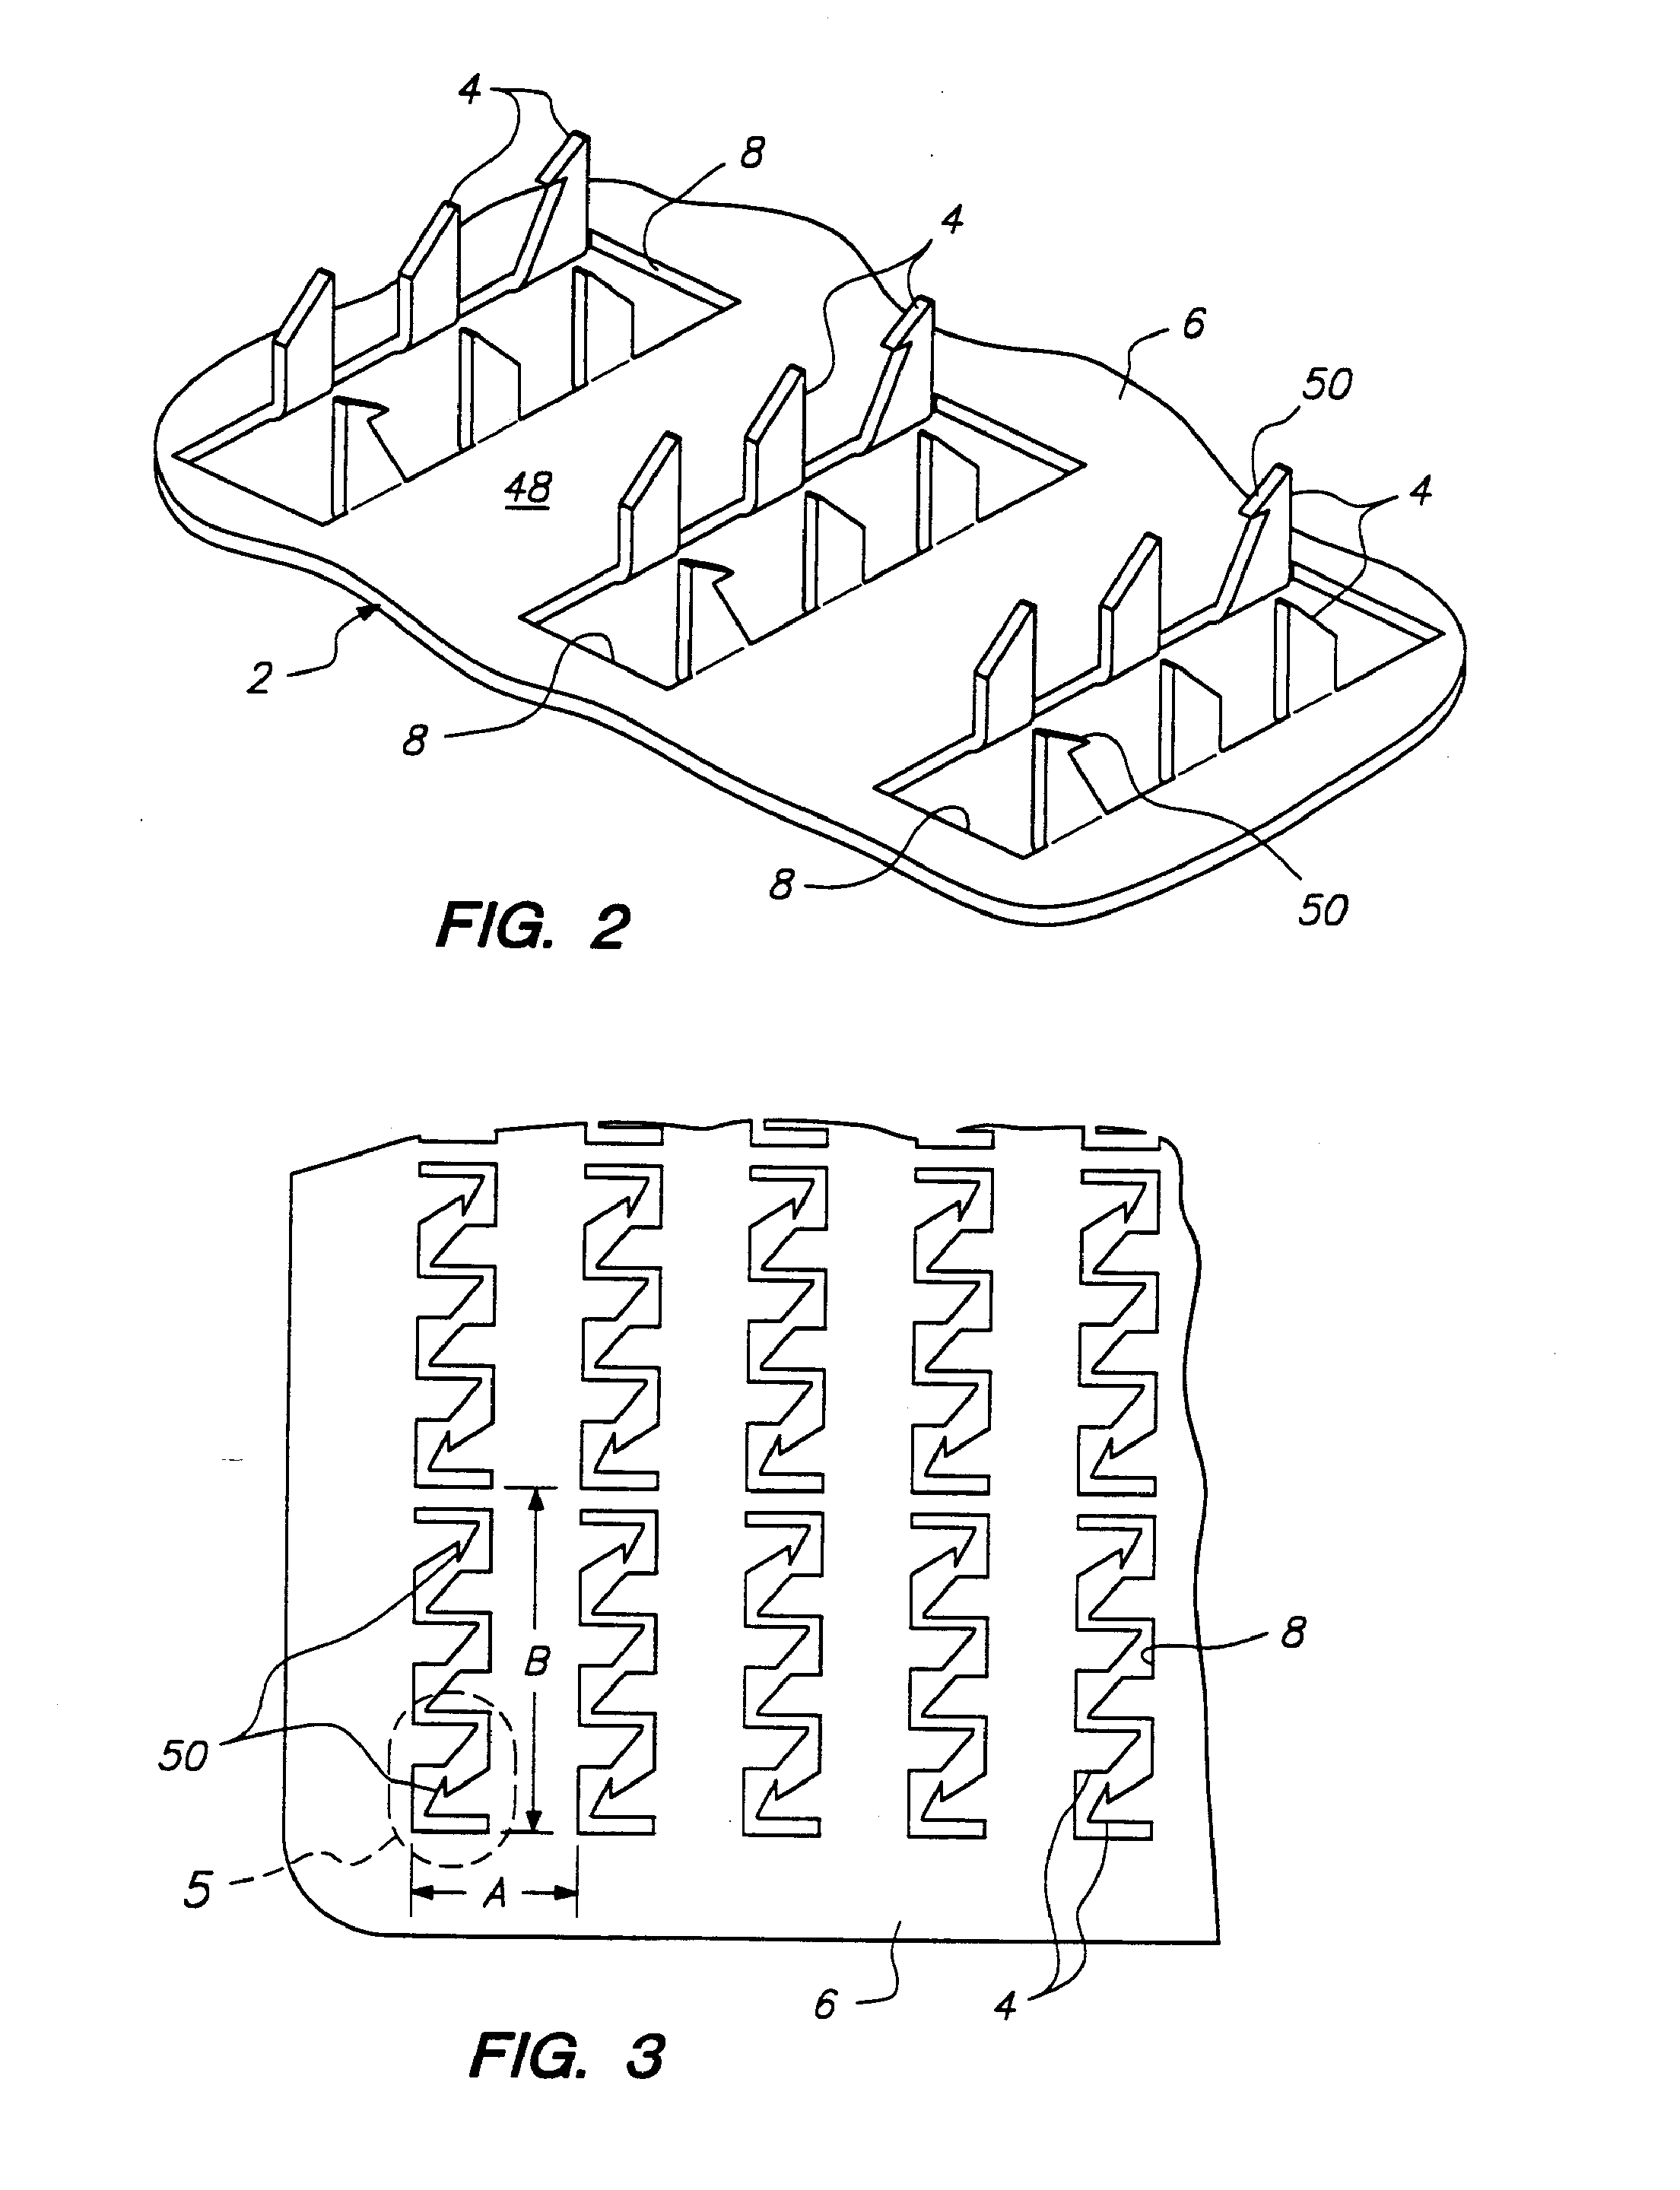 Device with anchoring elements for transdermal delivery or sampling of agents